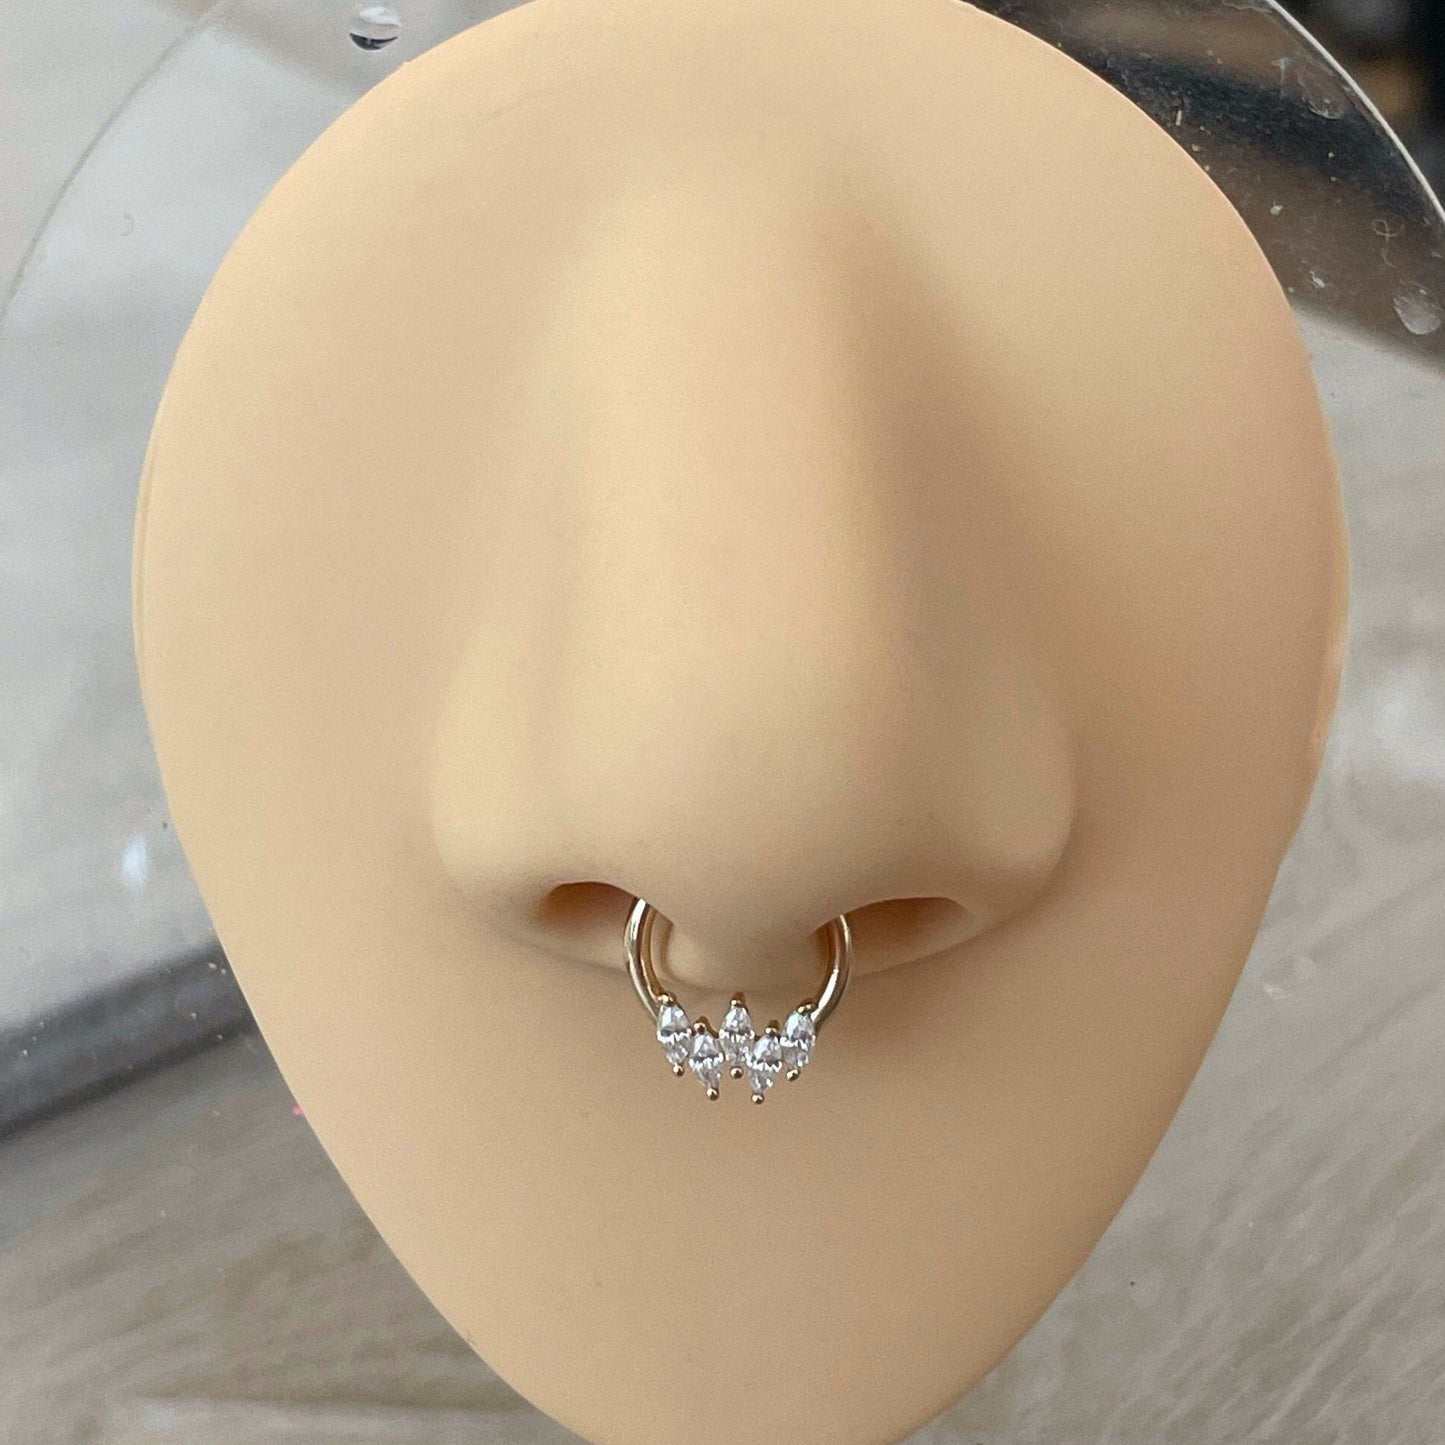 Solid Gold CZ Septum Piercing (16G | 6mm, 8mm or 10mm | 14k Solid Gold | White or Yellow Gold)Minimalist Solid Gold Septum Piercing (16G | 8mm or 10mm | 14k Solid Gold | White or Yellow Gold)